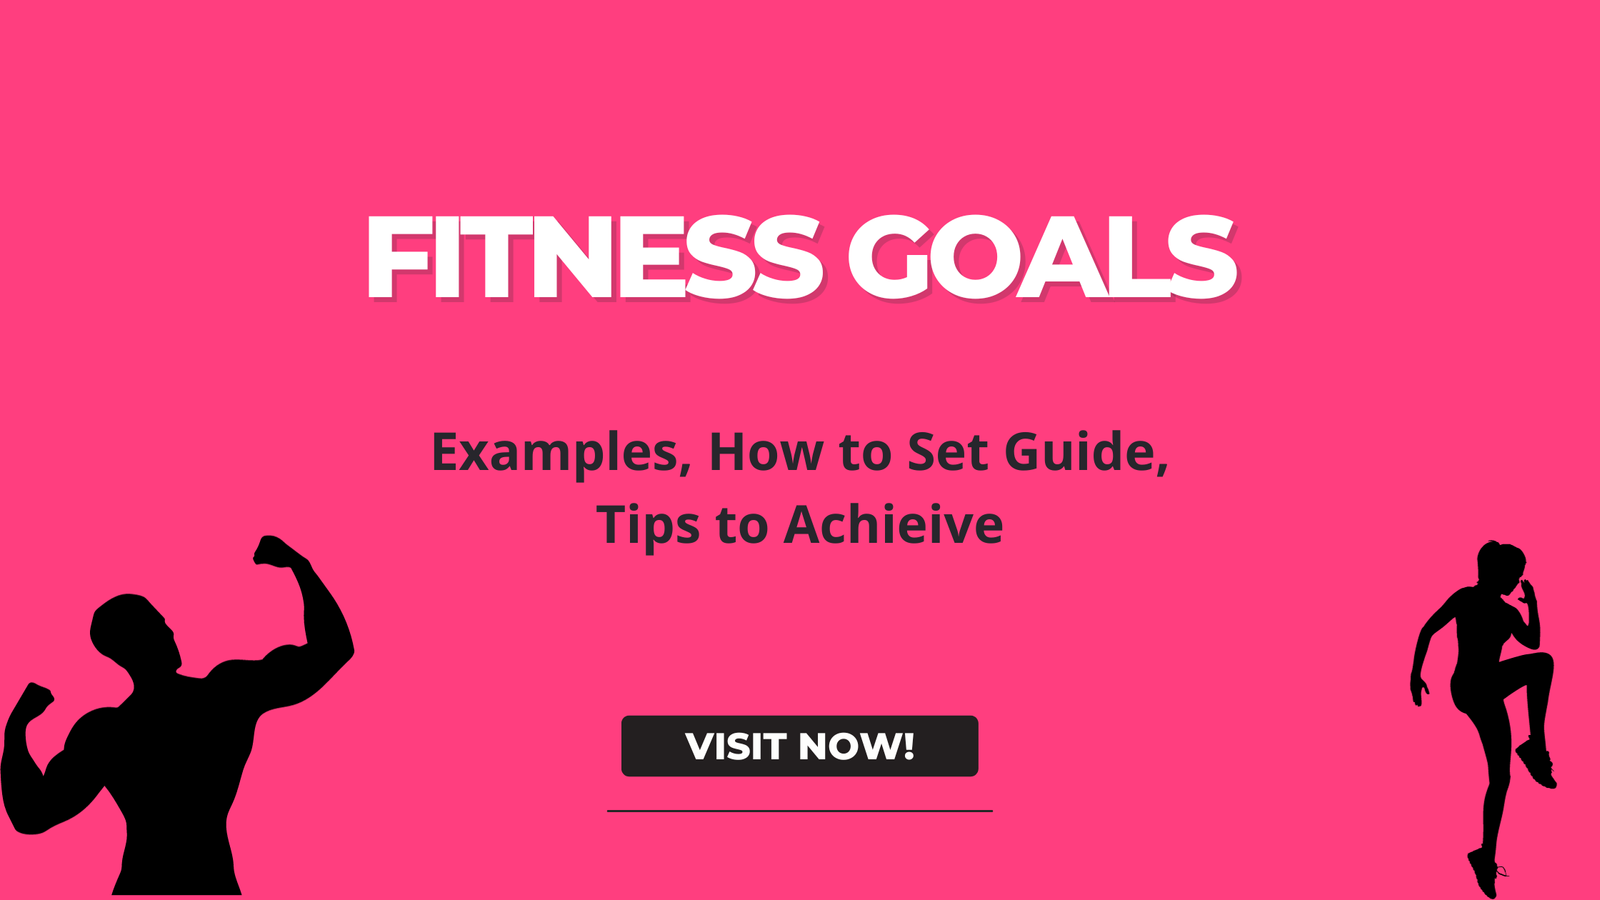 How to set fitness goals for 2023